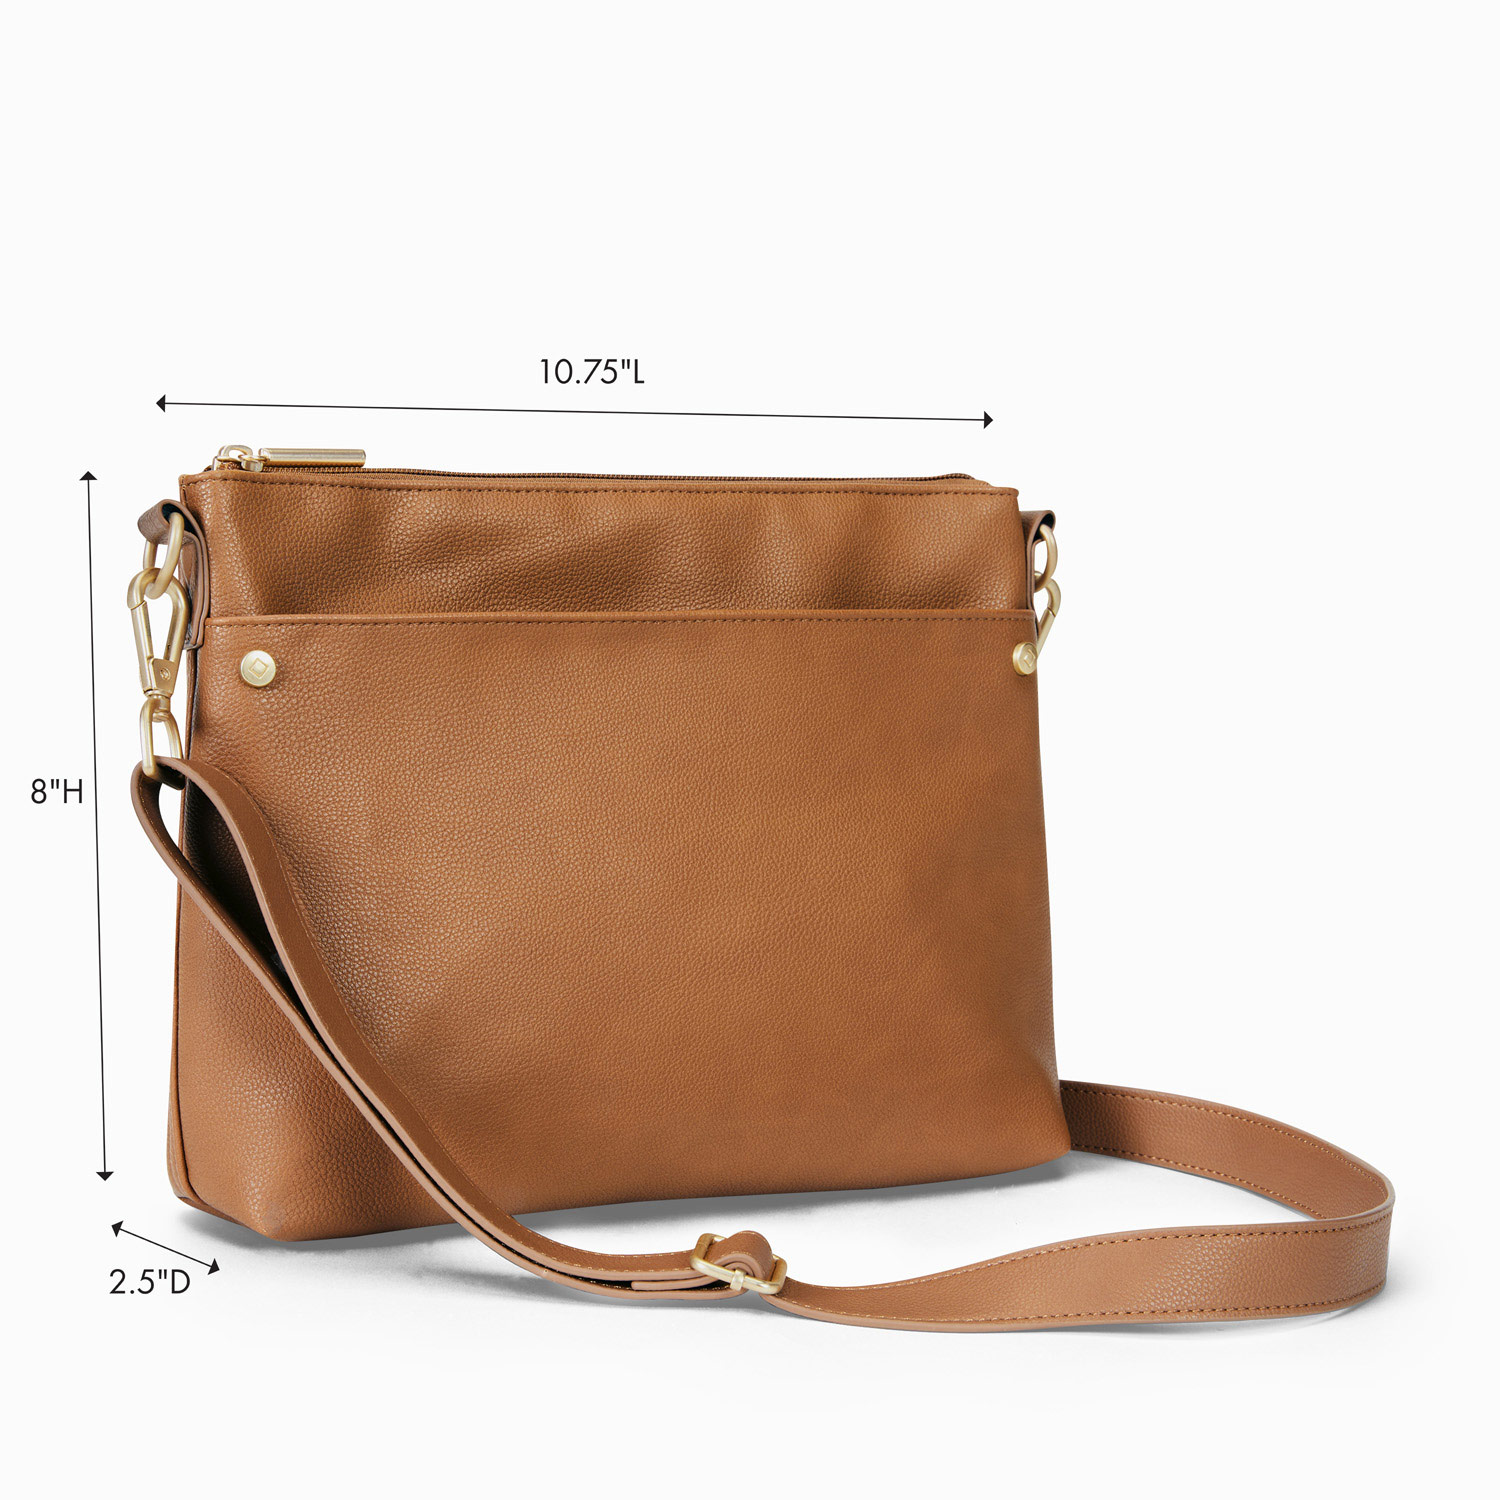 Caramel Smooth Pebble - Relaxed Crossbody Bag - Thirty-One Gifts - Affordable  Purses, Totes & Bags